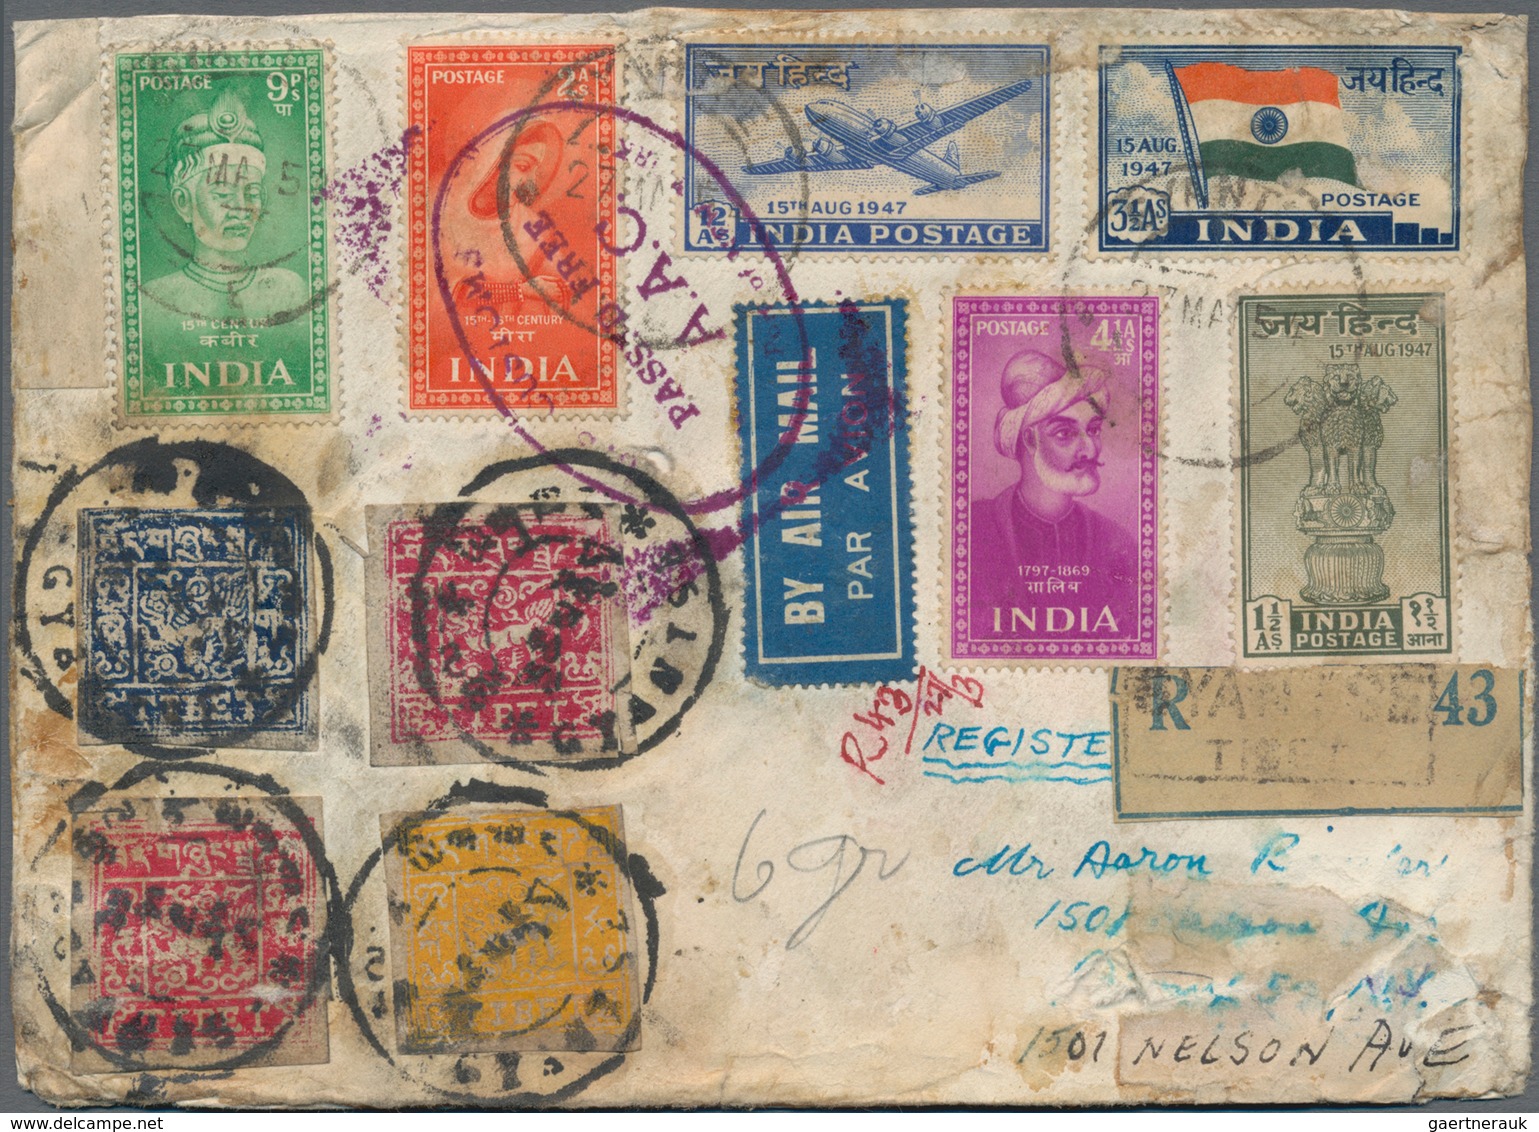 Tibet: 1933, 1/2 T. Orange, 2/3 T. Blue, 1 T. Rose And 2 T. Carmine Tied Bilingual "GYANTSE" In Comb - Asia (Other)